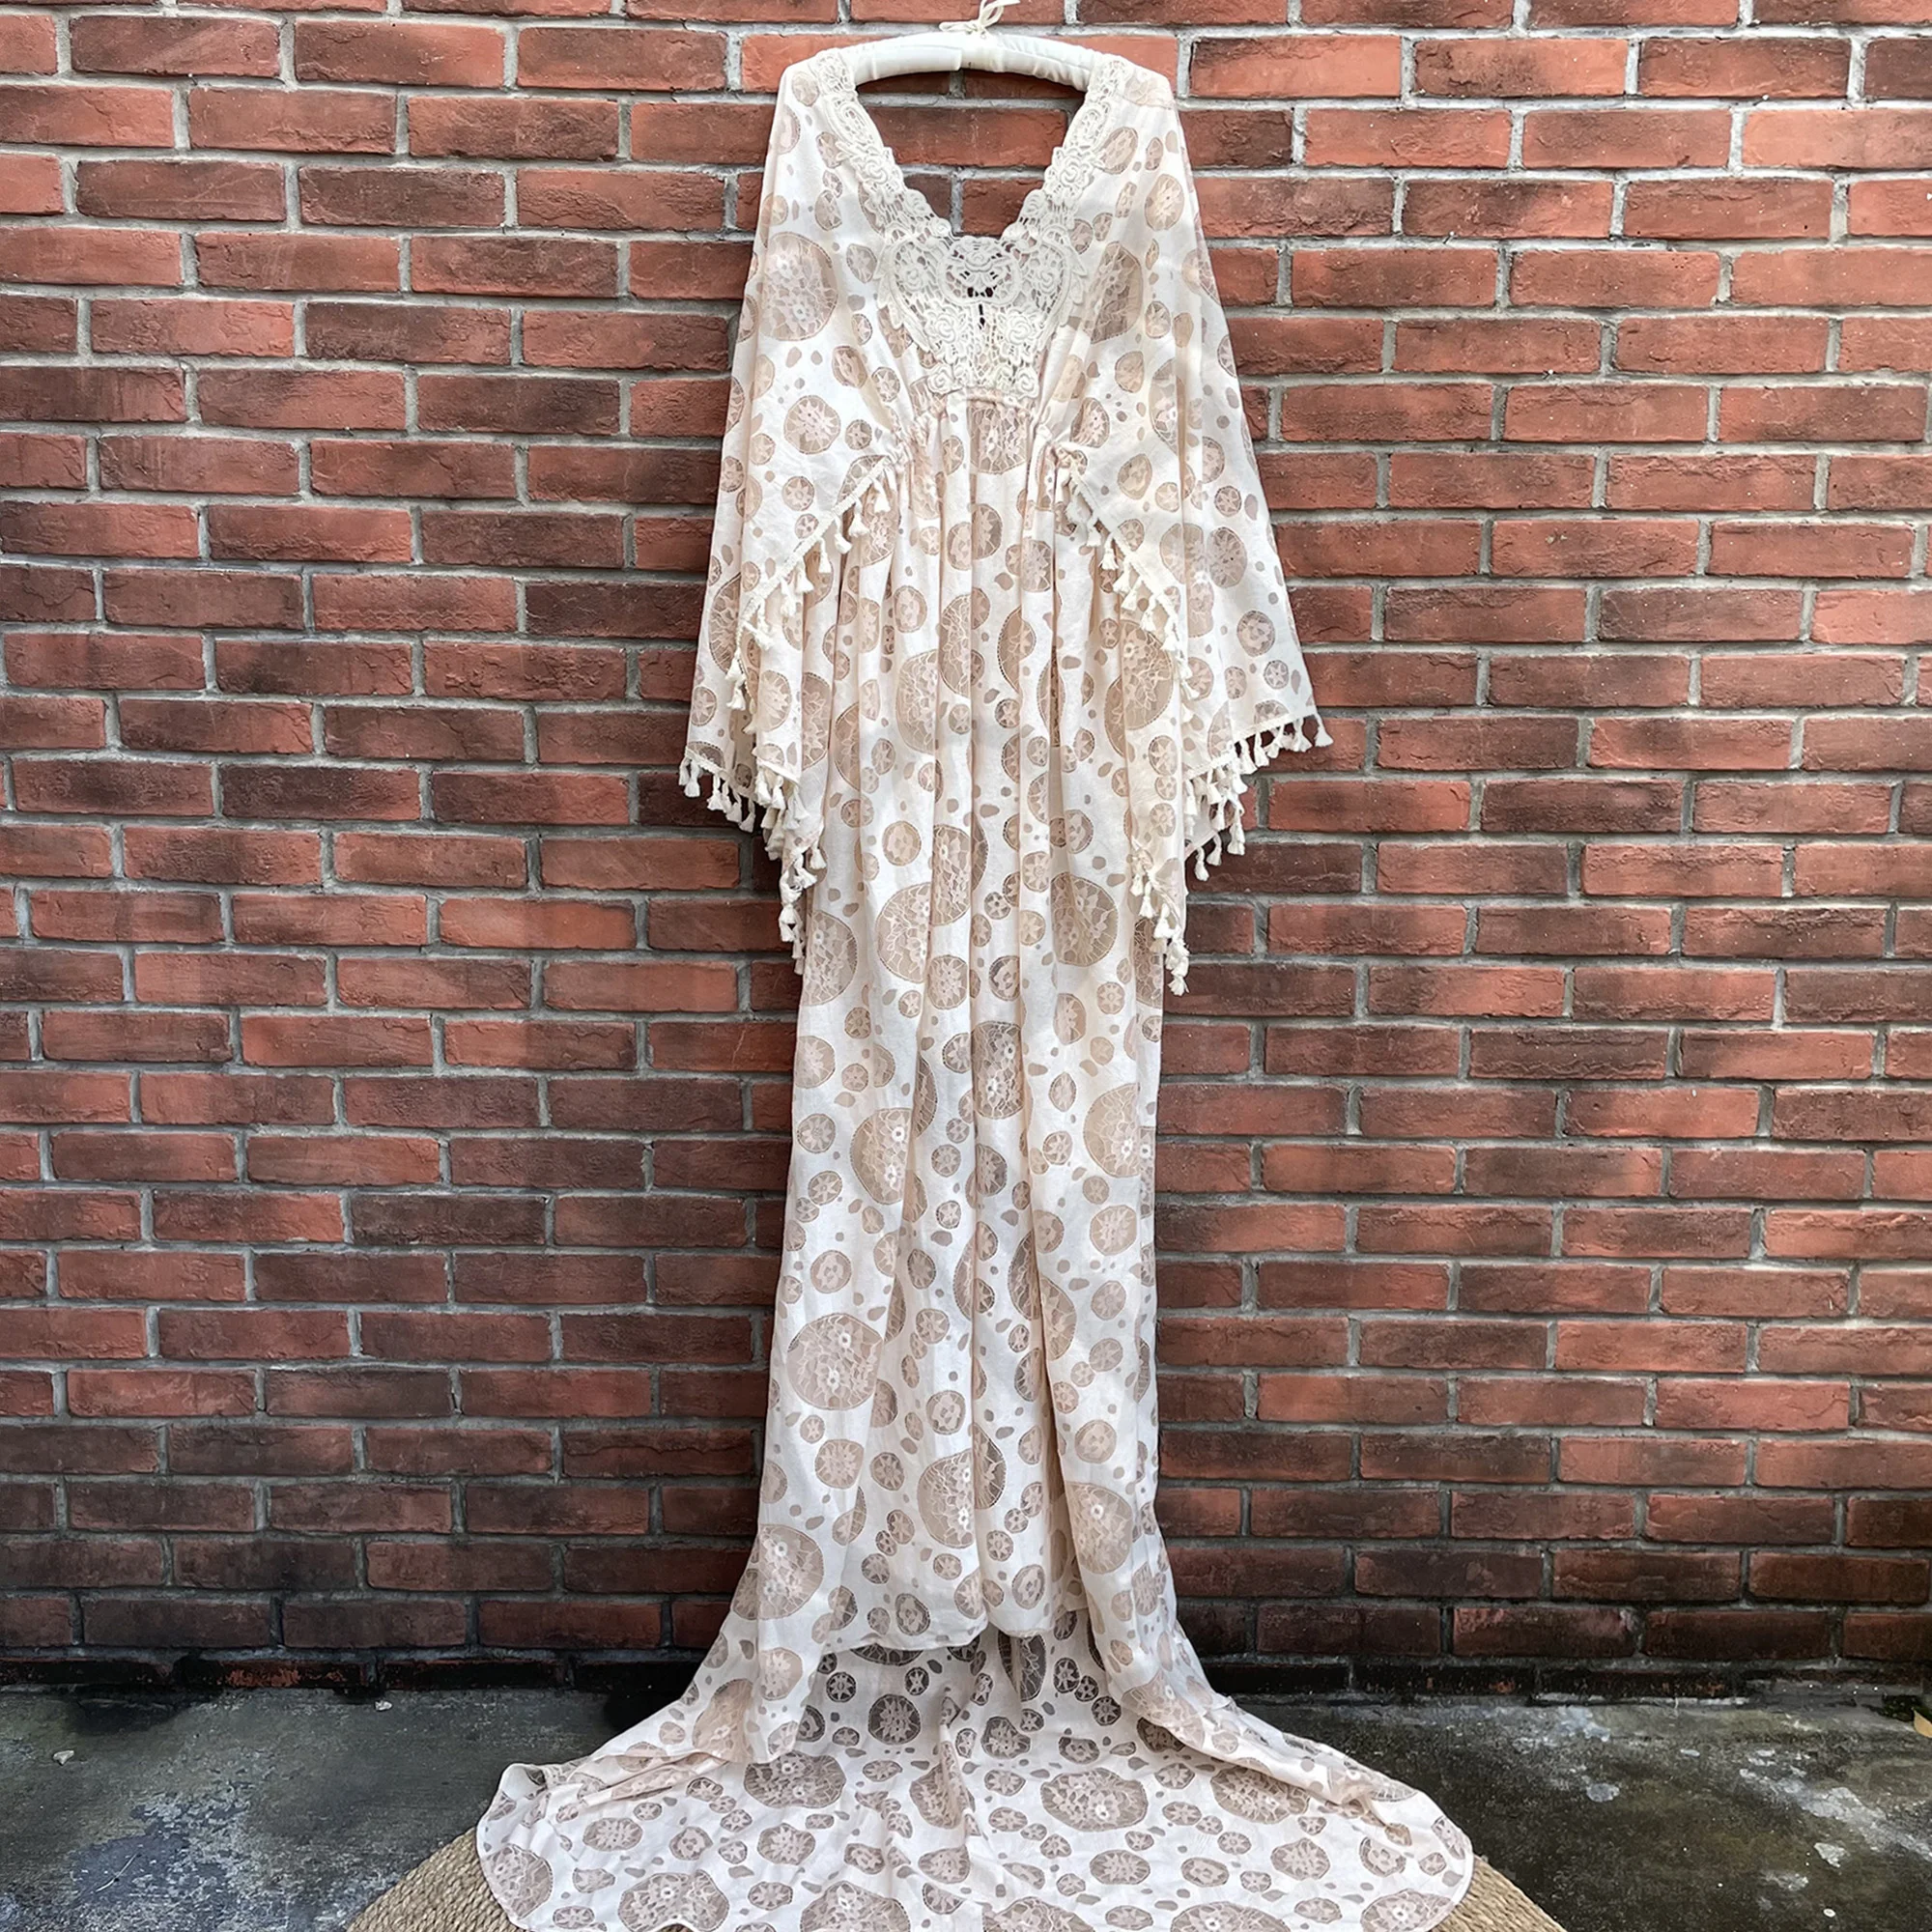 Vintage Boho Lace Spotty Photo Shoot Gown Pregnant Robe Maternity Dress Evening Party Costume for Women Photography Accessories enlarge